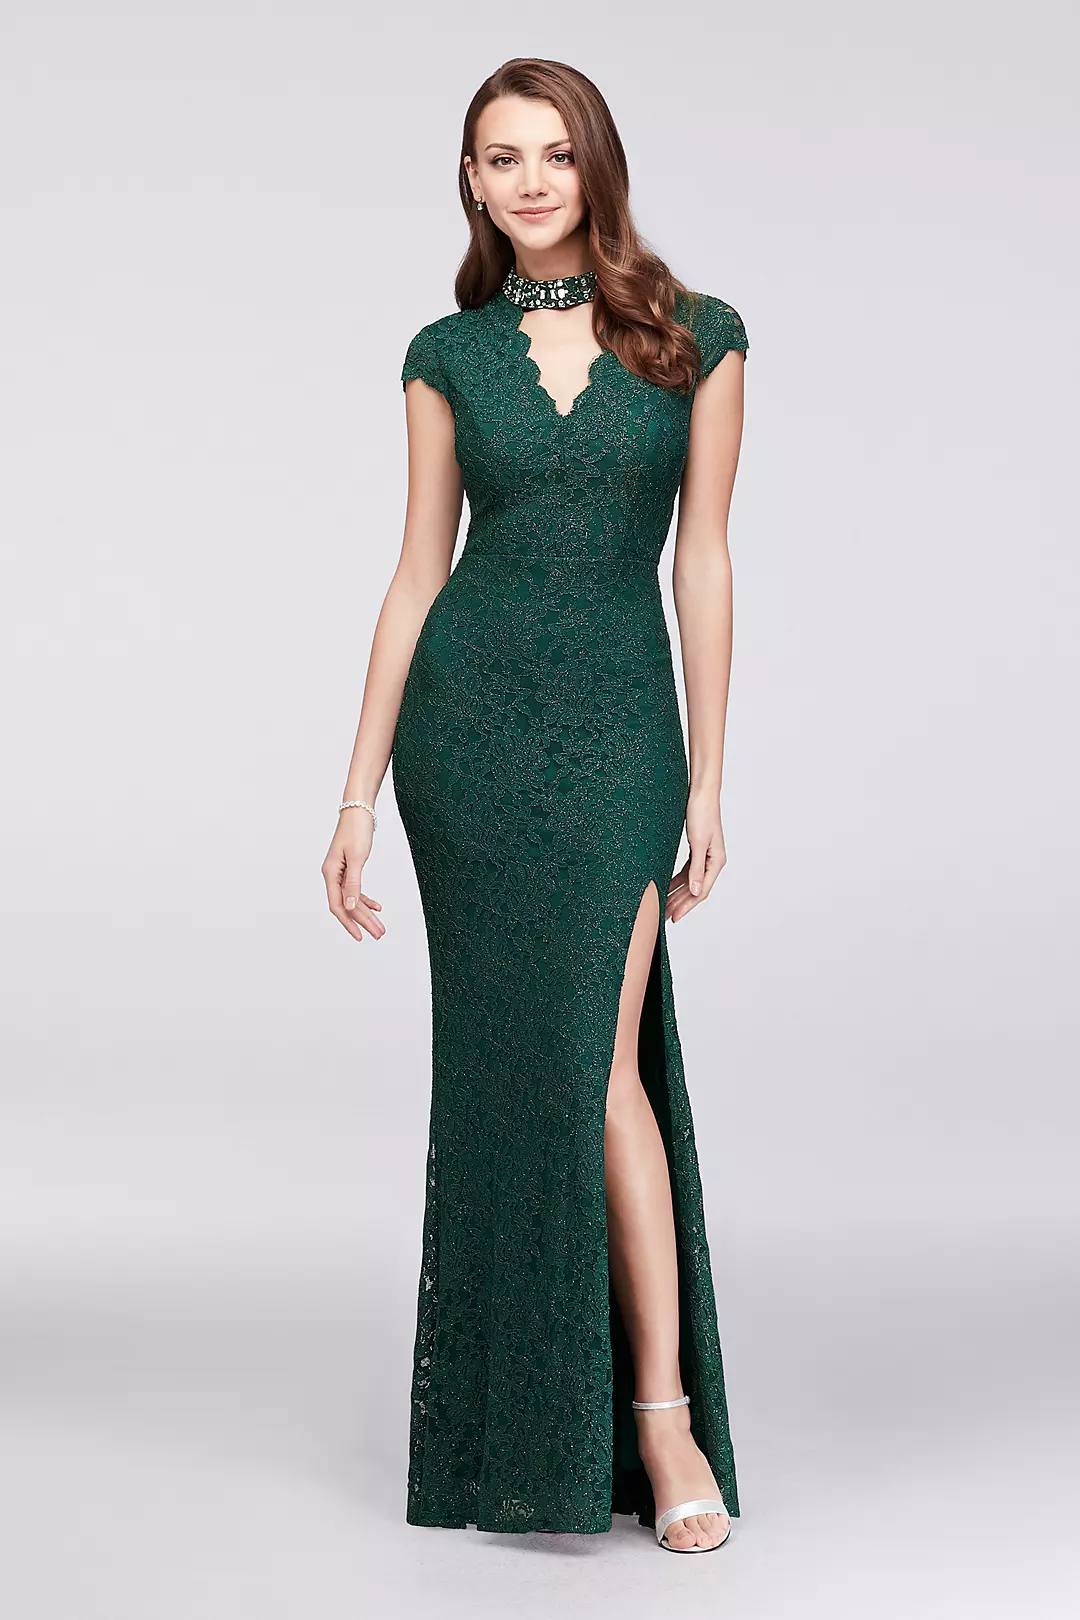 Glitter Lace Mermaid Gown with Gem Neckline Image